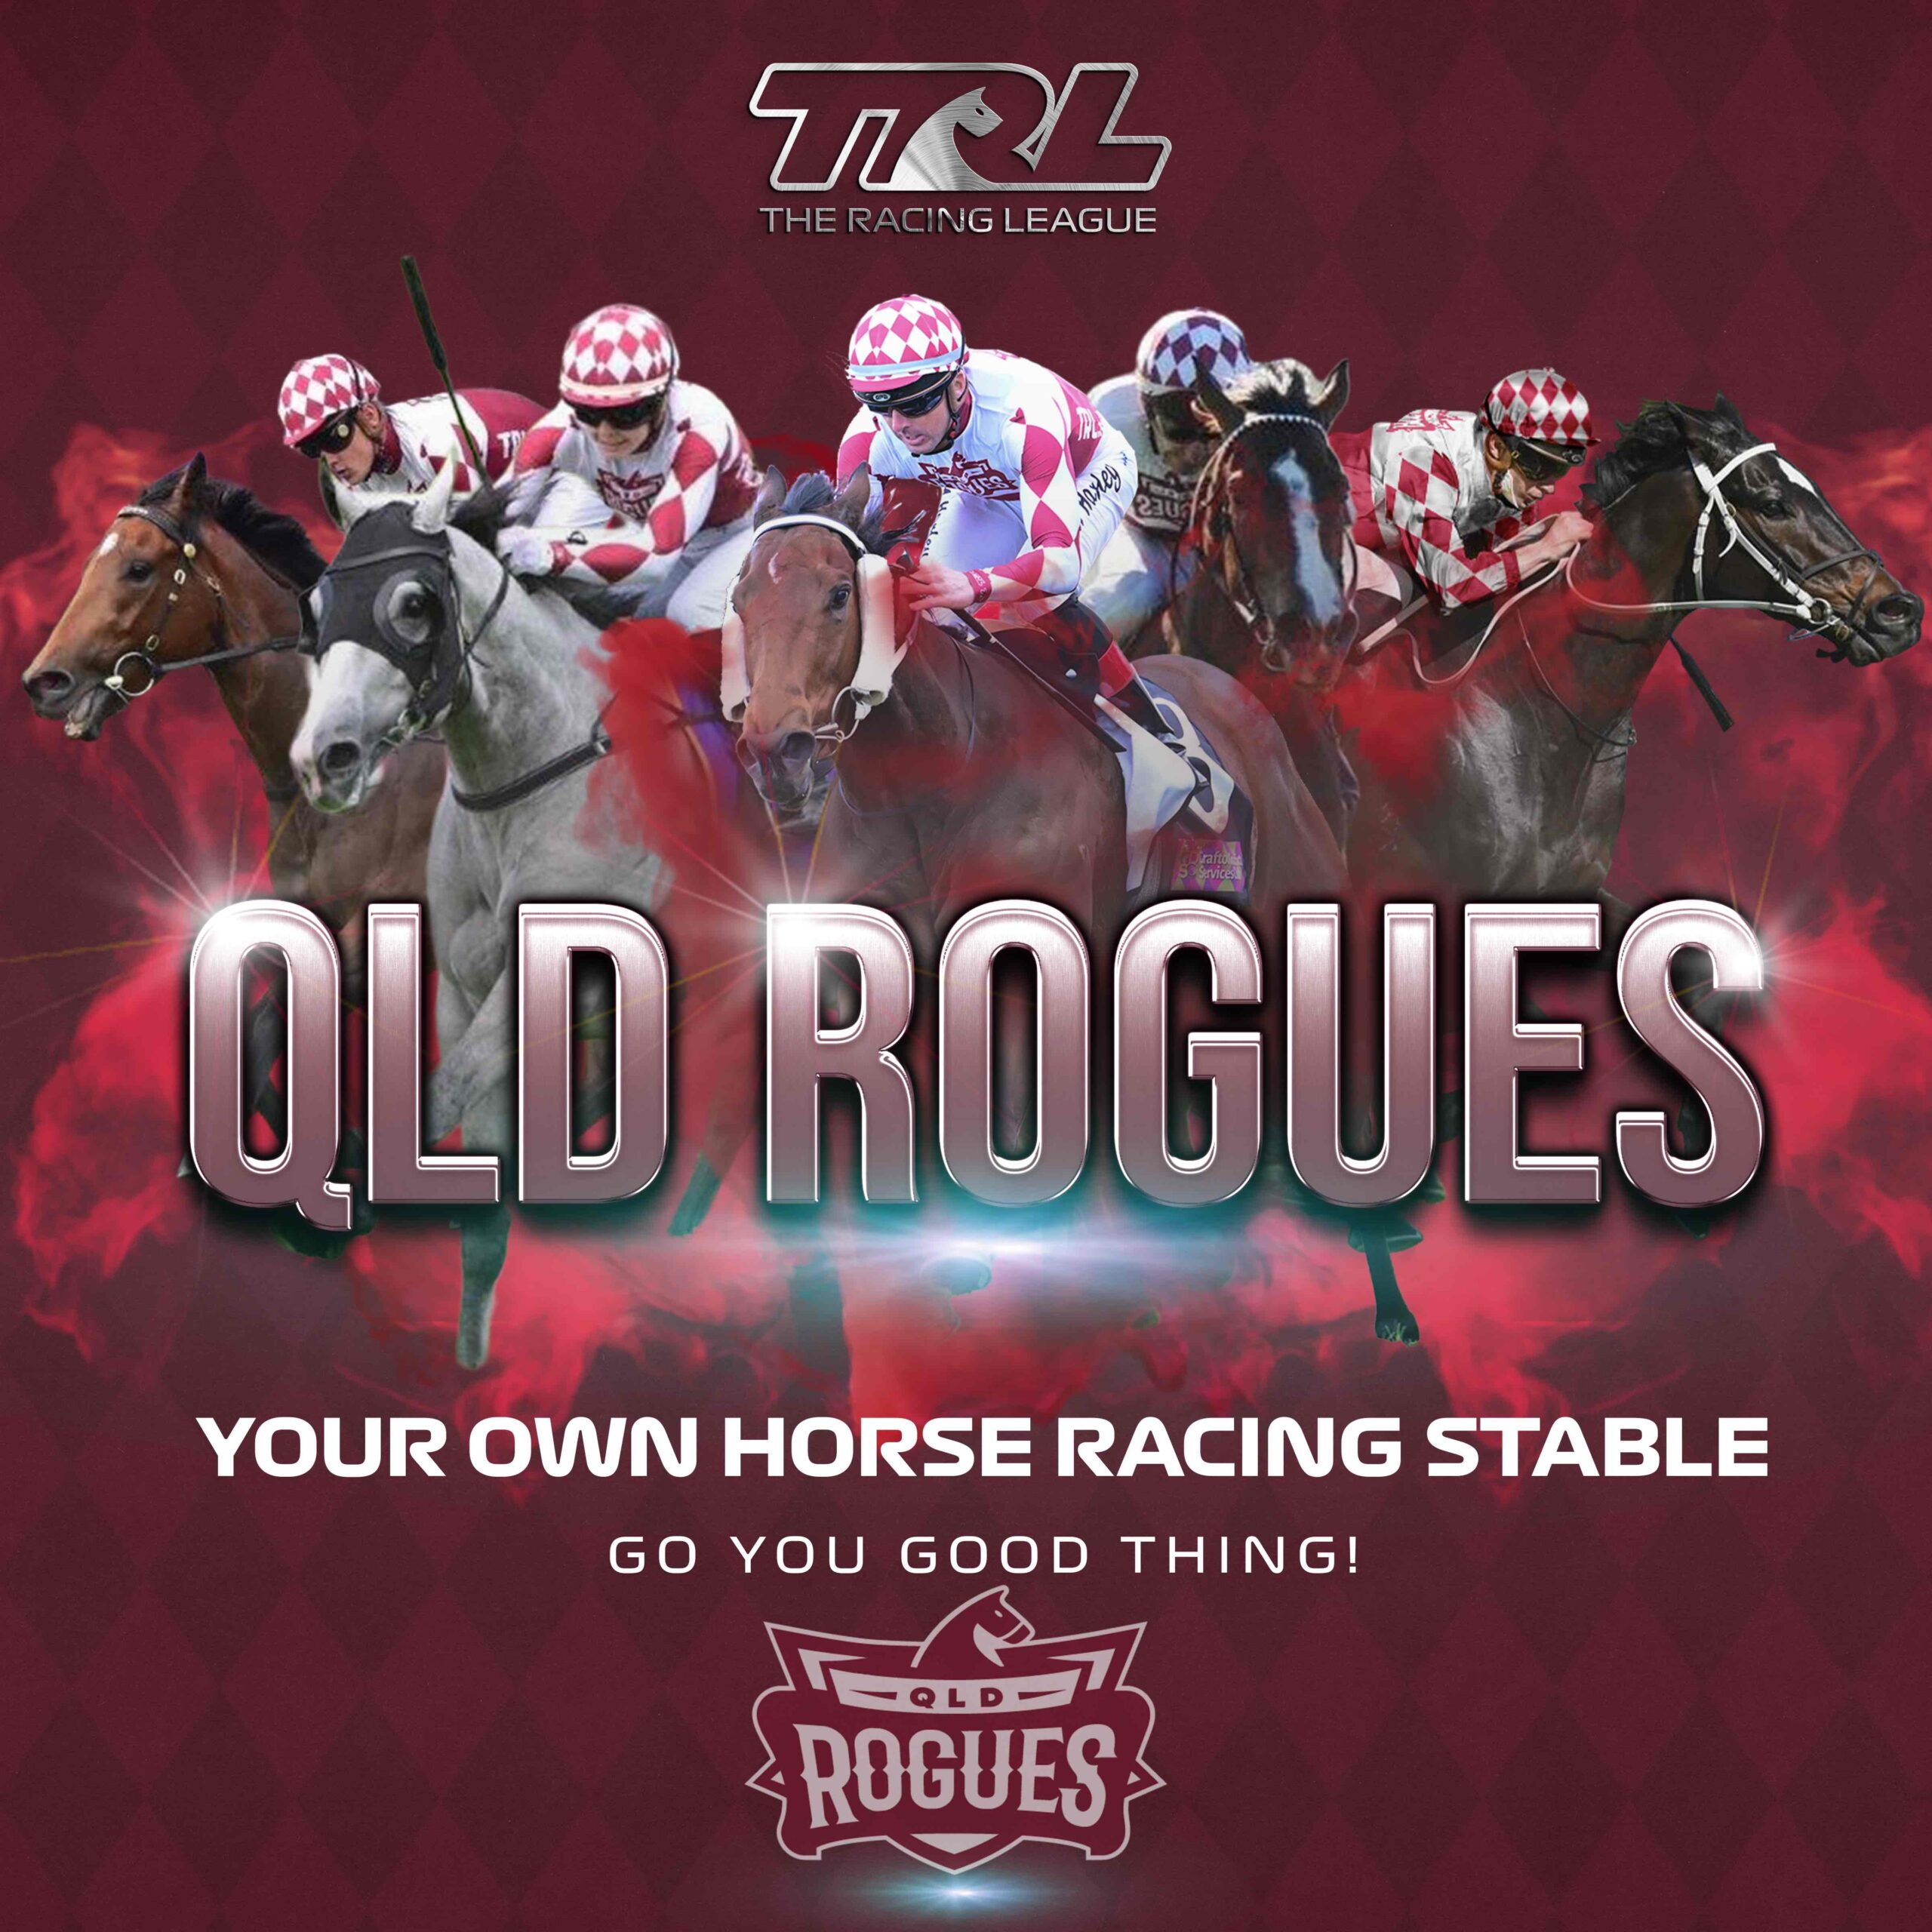 The QLD Rogues racing team competing in The Racing League